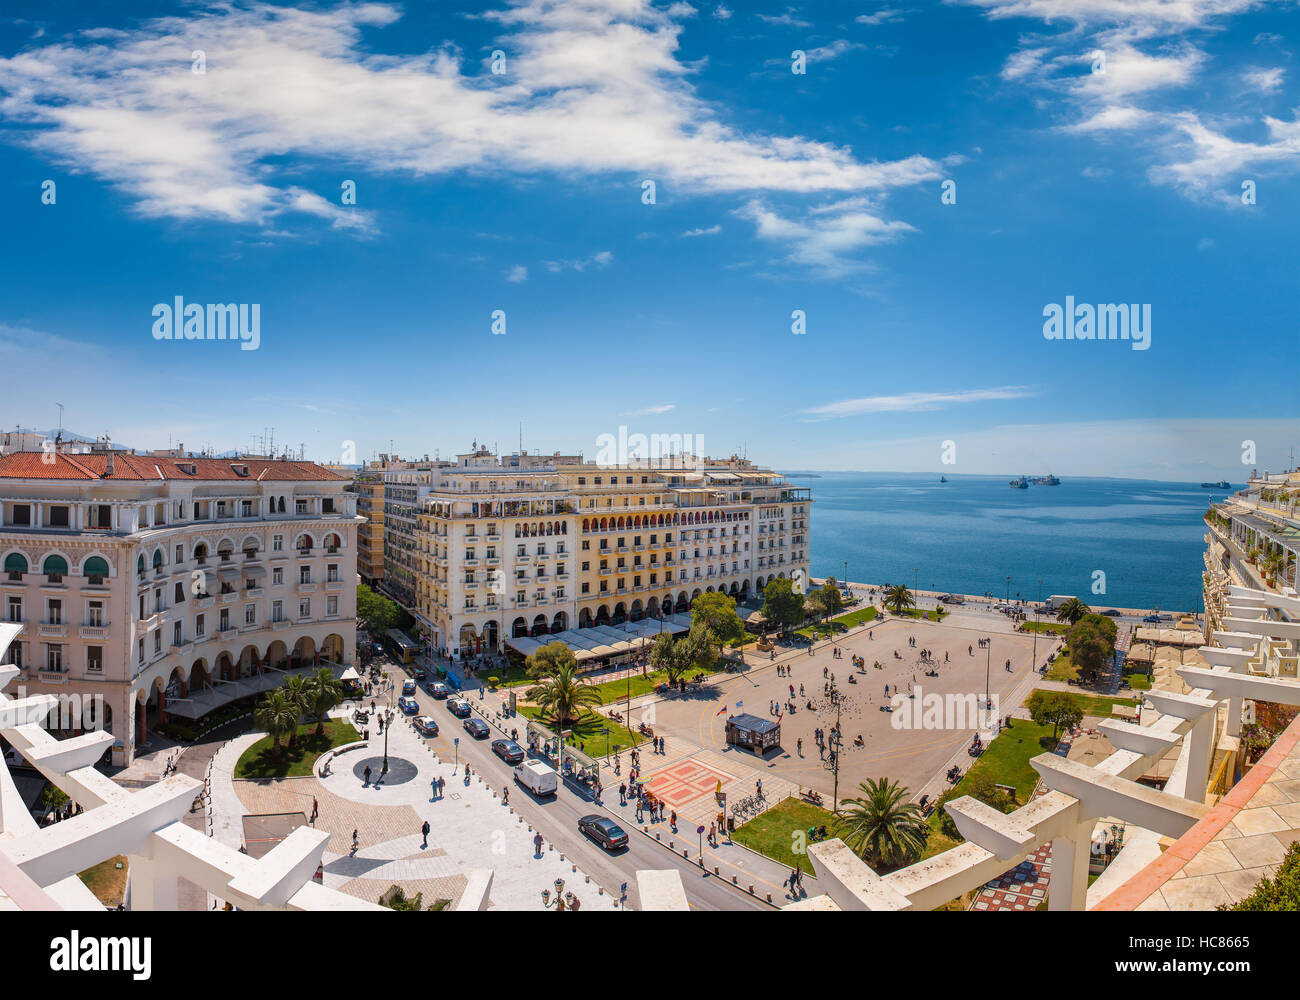 View of Aristotelous square, the heart of Thessaloniki city, Greece Stock Photo